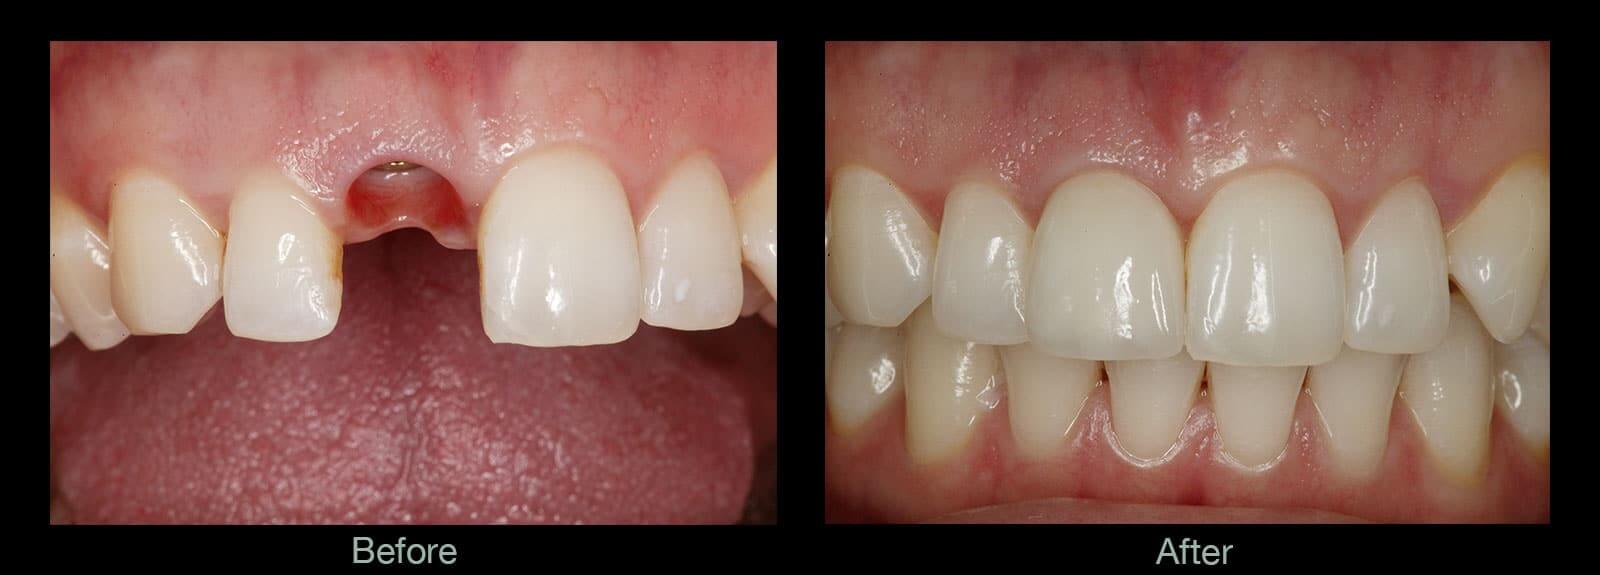 Dental-Implants-Before-After-Pictures.jpg